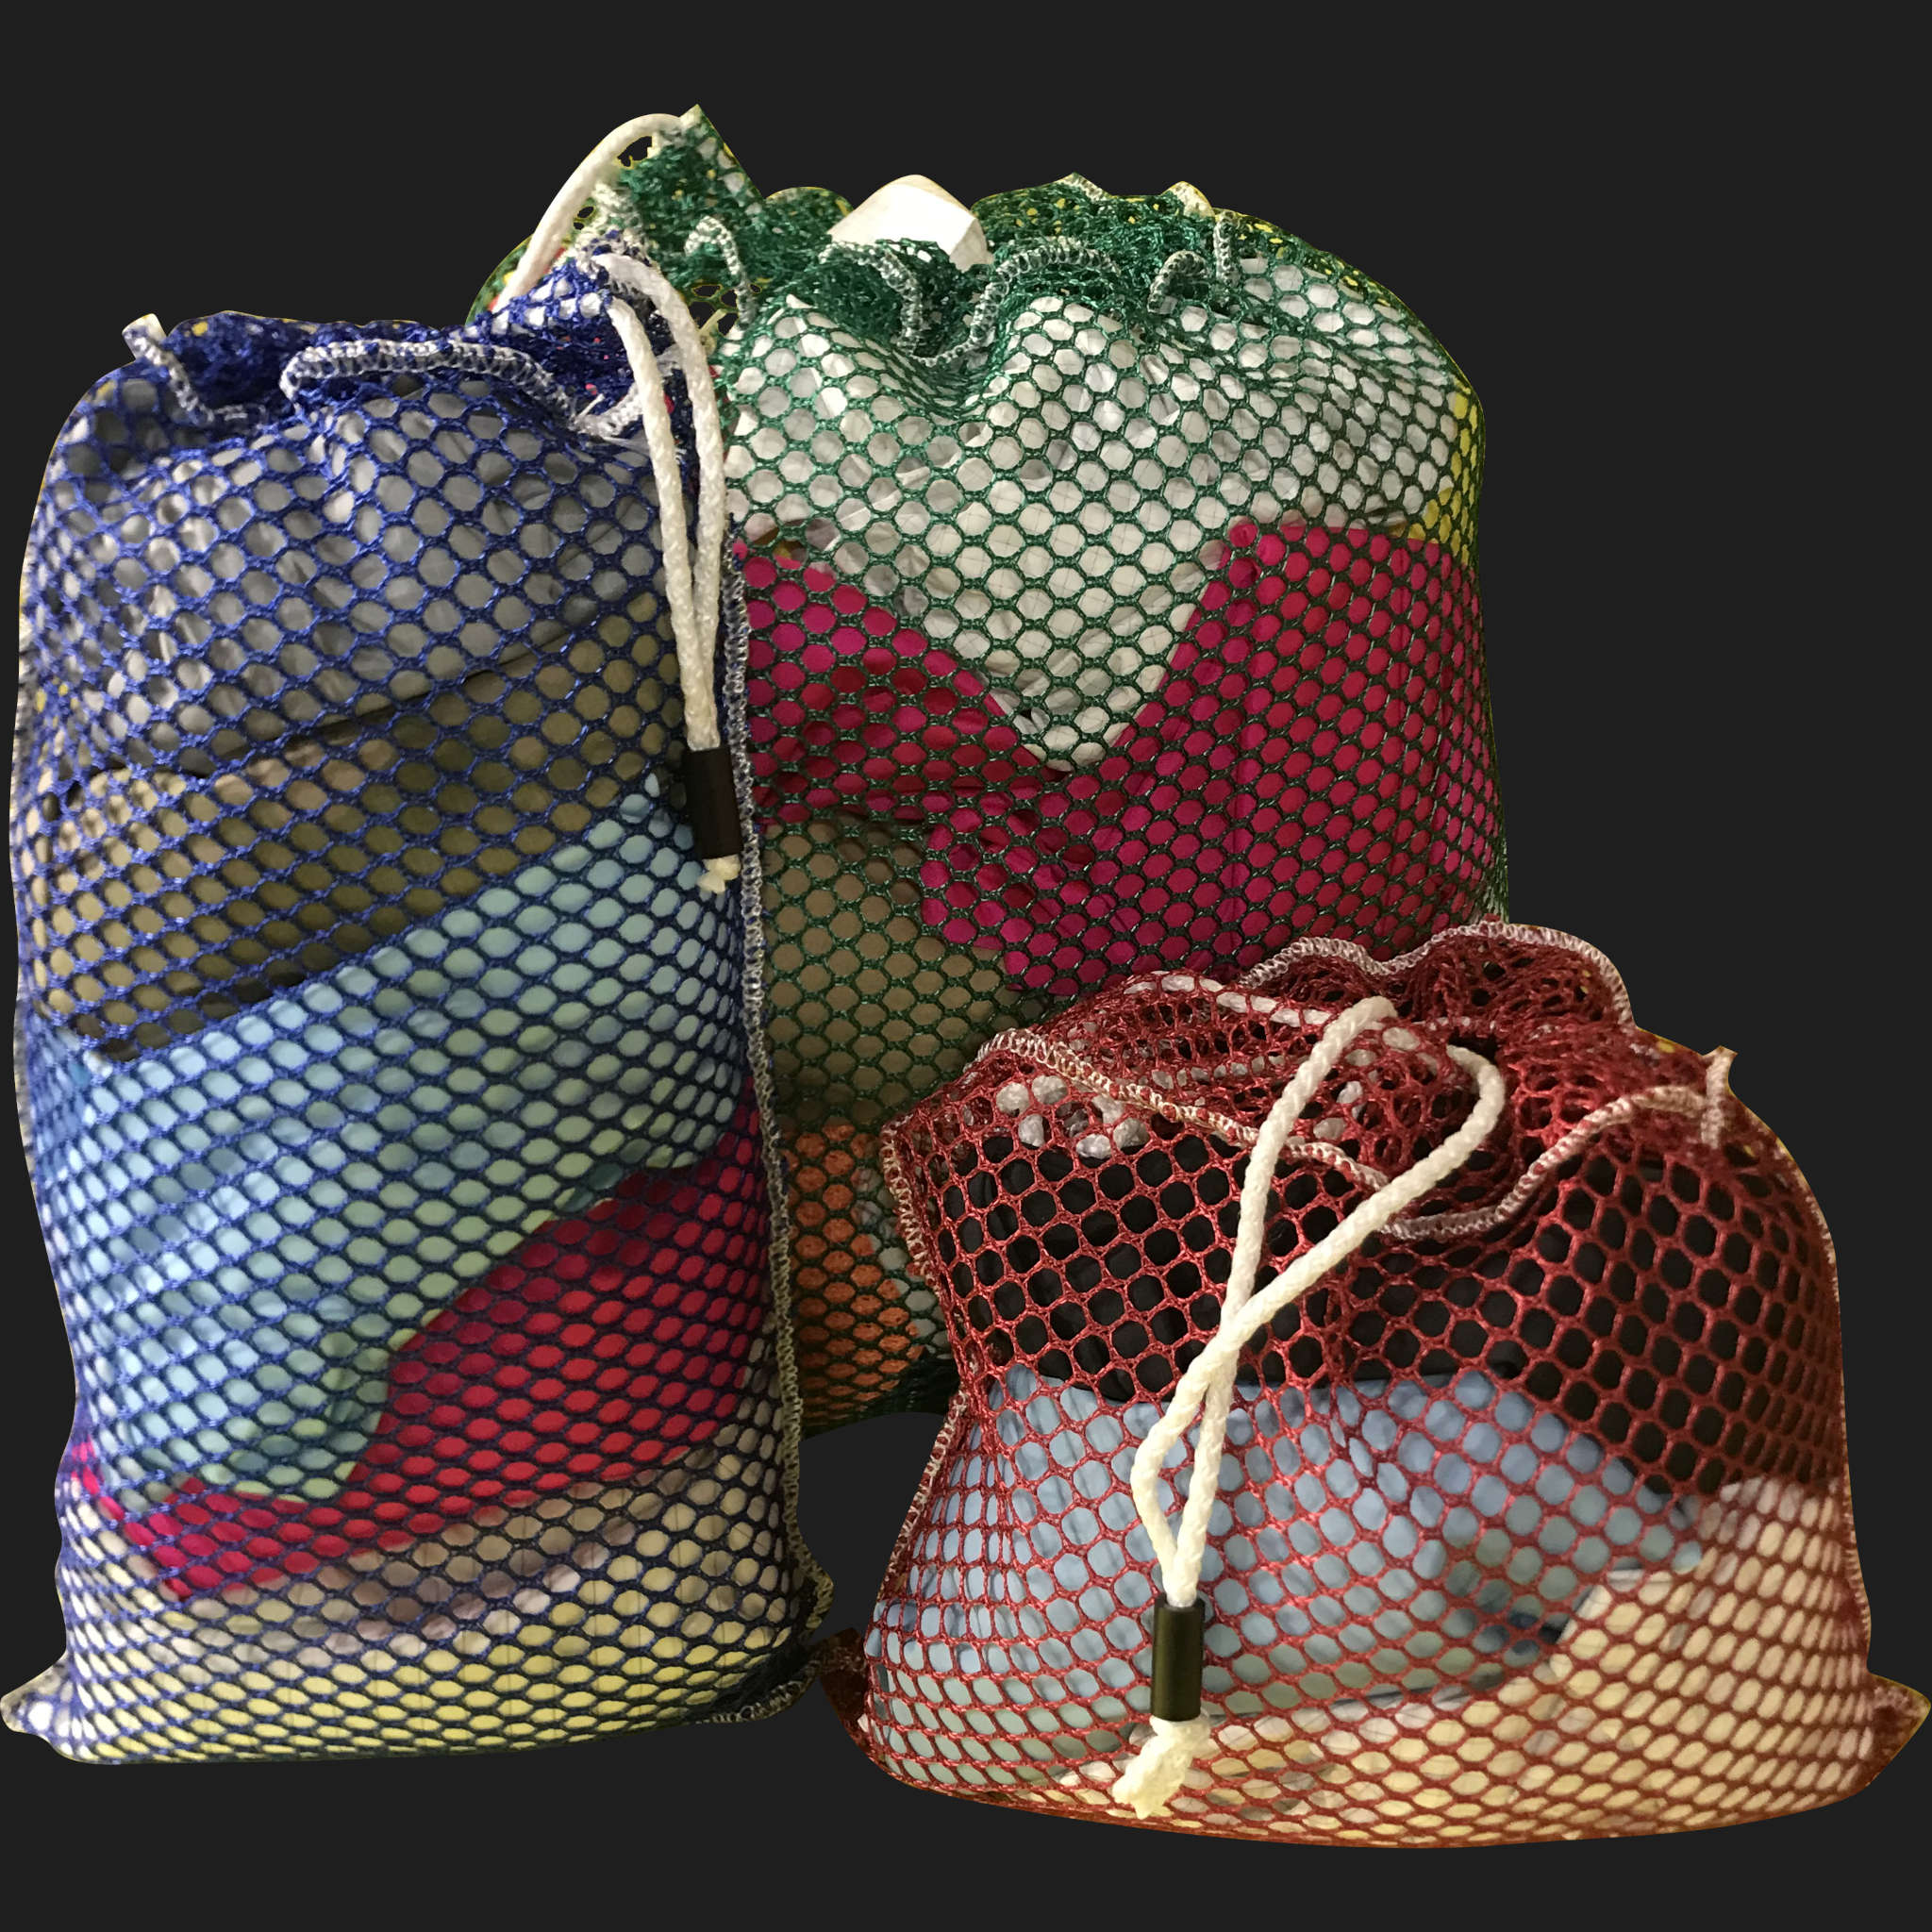 38" x 46" Customized Mesh-Net-Laundry Bags Heavy Duty with Cord and barrellock closure